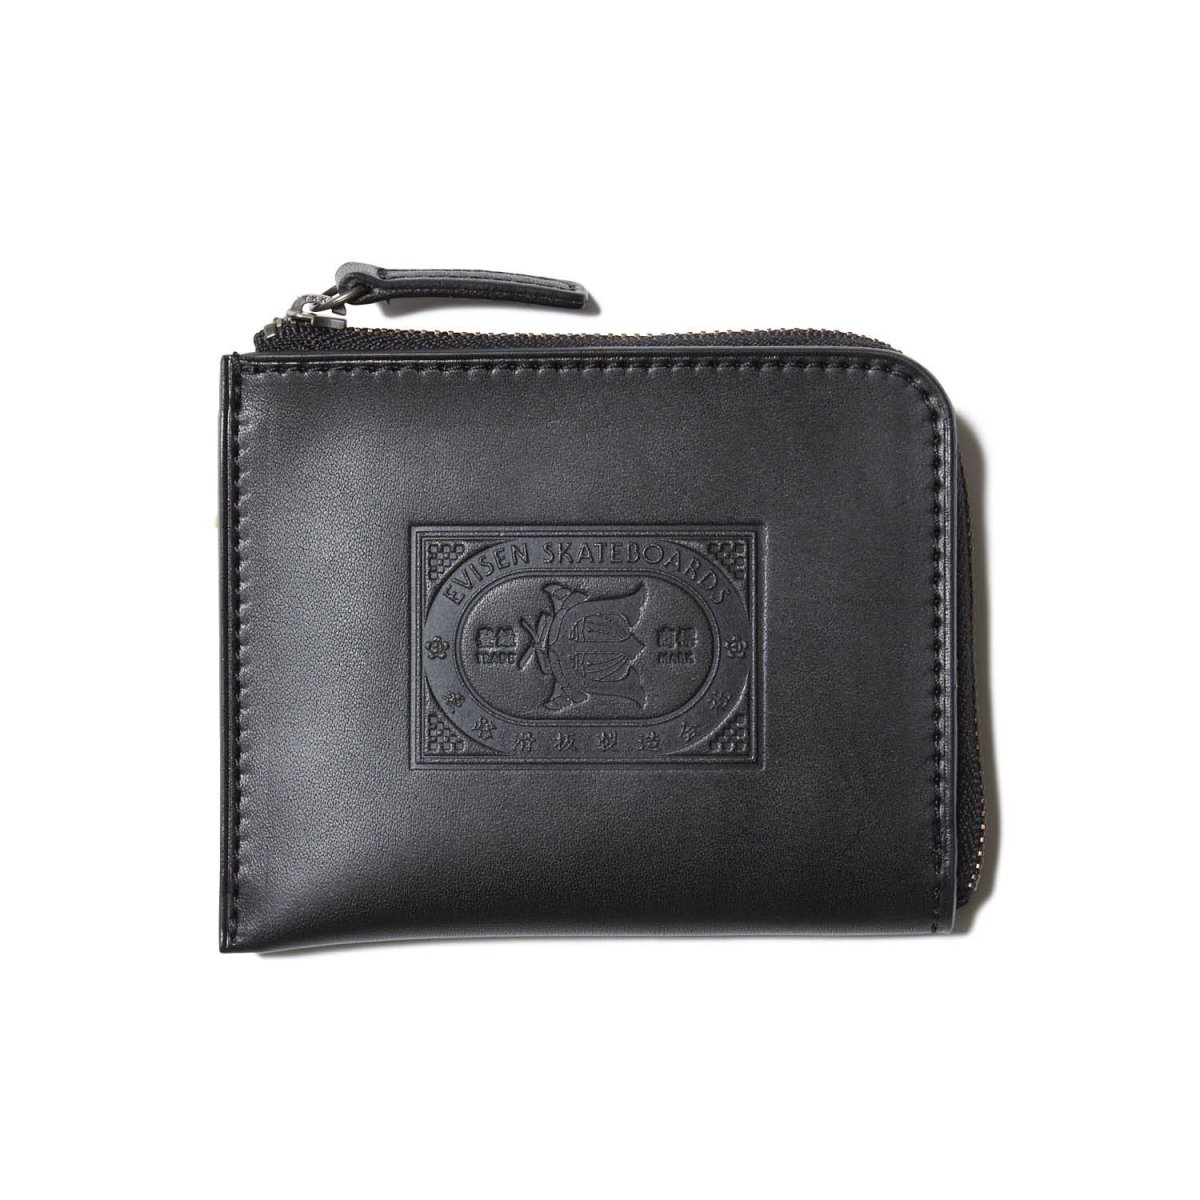 <img class='new_mark_img1' src='https://img.shop-pro.jp/img/new/icons8.gif' style='border:none;display:inline;margin:0px;padding:0px;width:auto;' />EVISENLeather Wallet (Black)
                          </a>
            <span class=